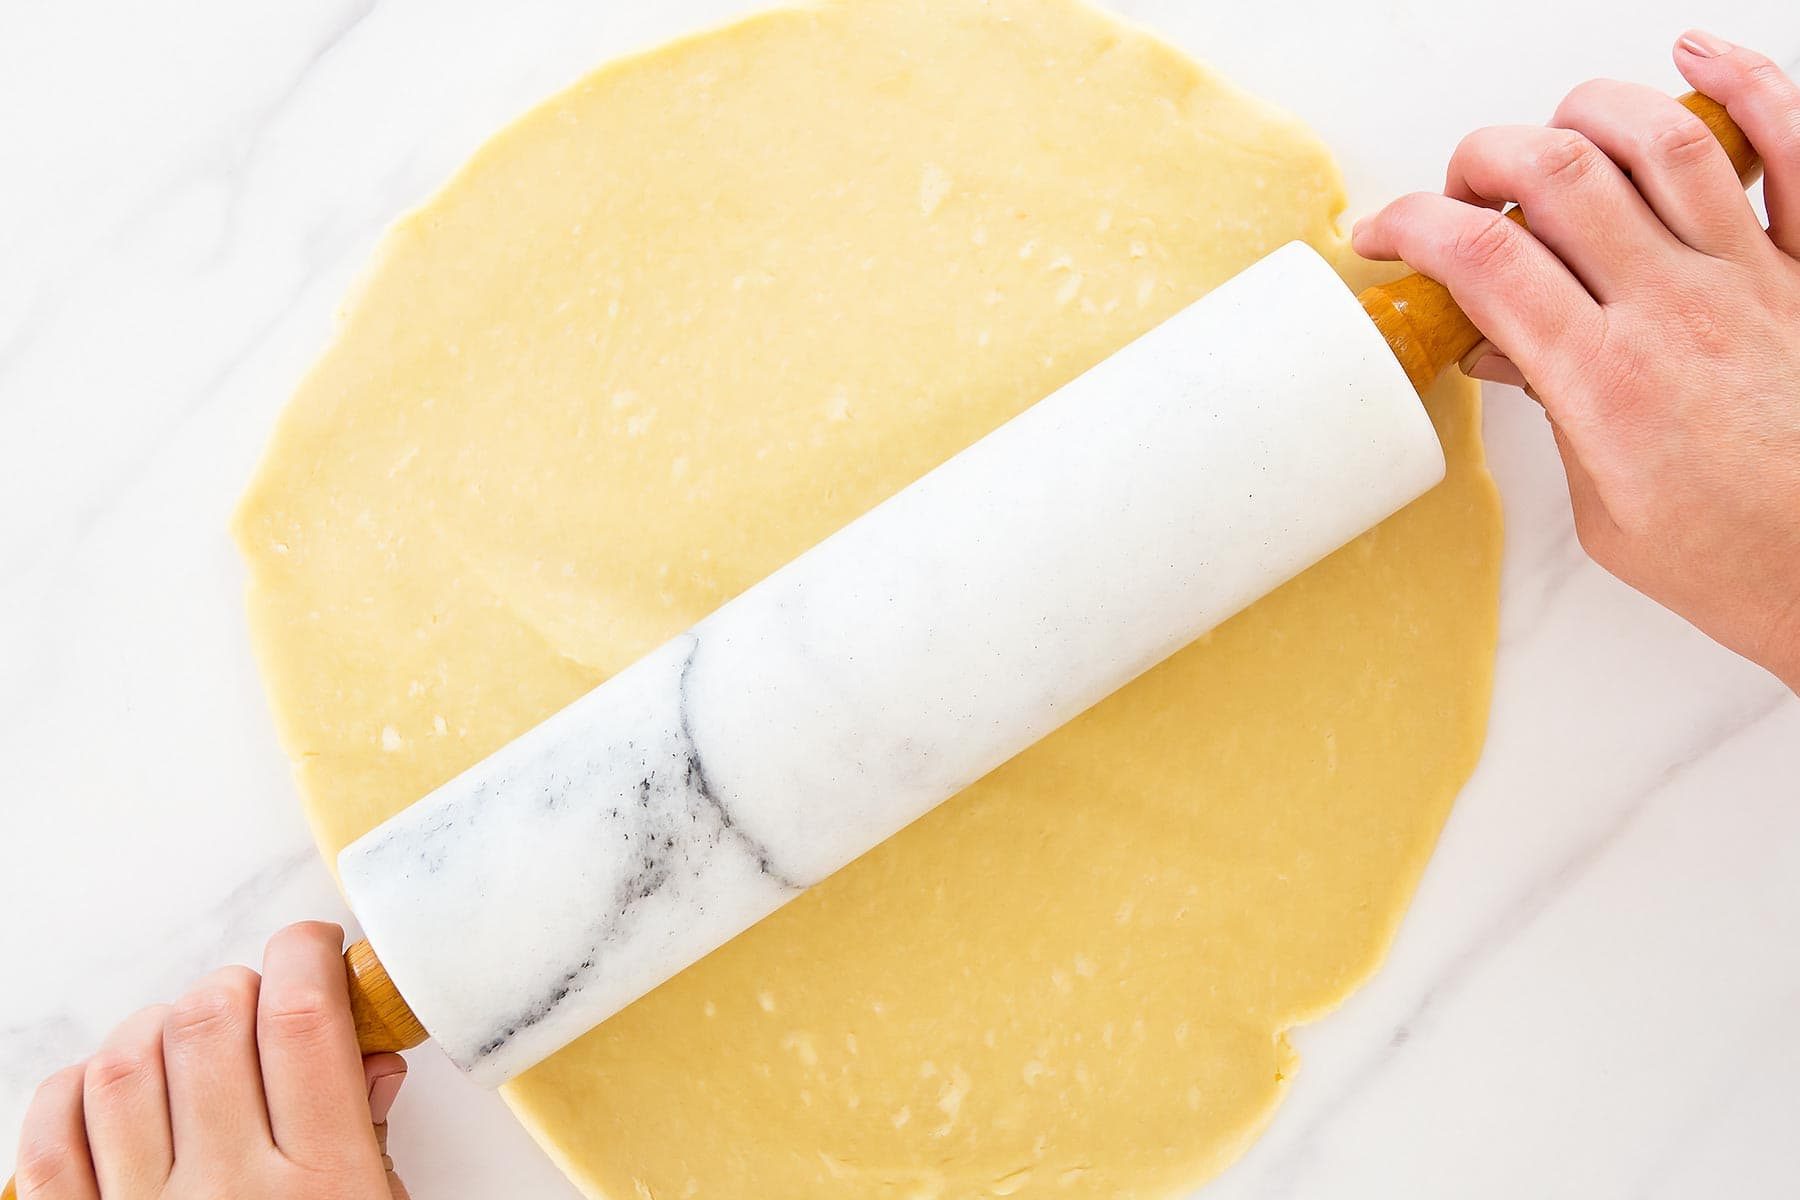 Marble rolling pin rolling out flaky pie dough